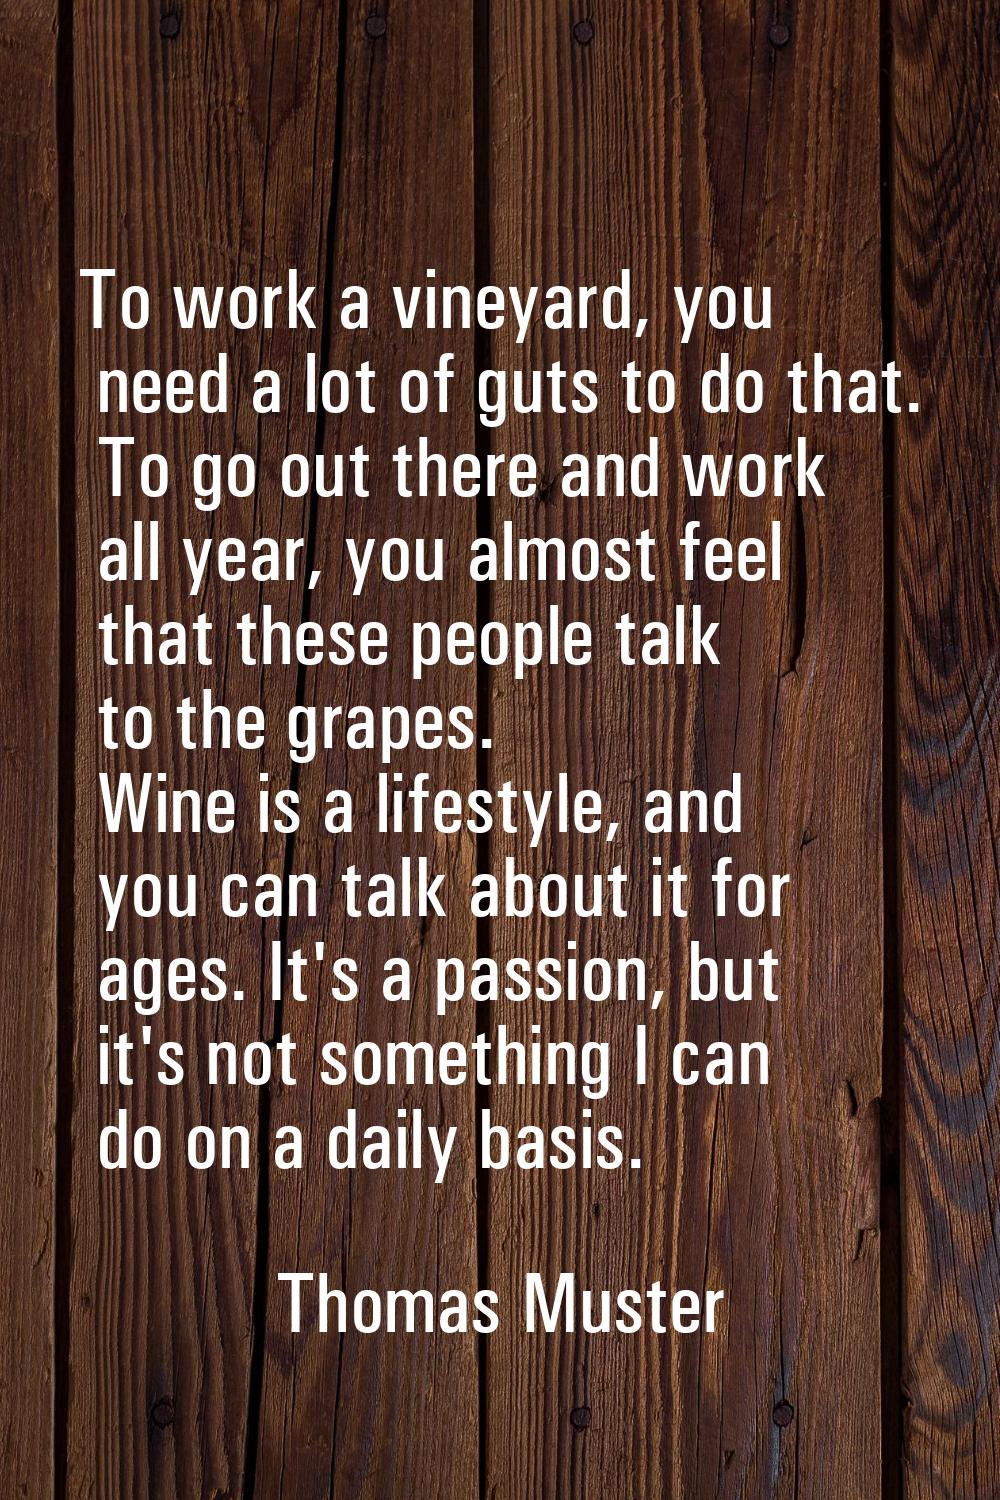 To work a vineyard, you need a lot of guts to do that. To go out there and work all year, you almos